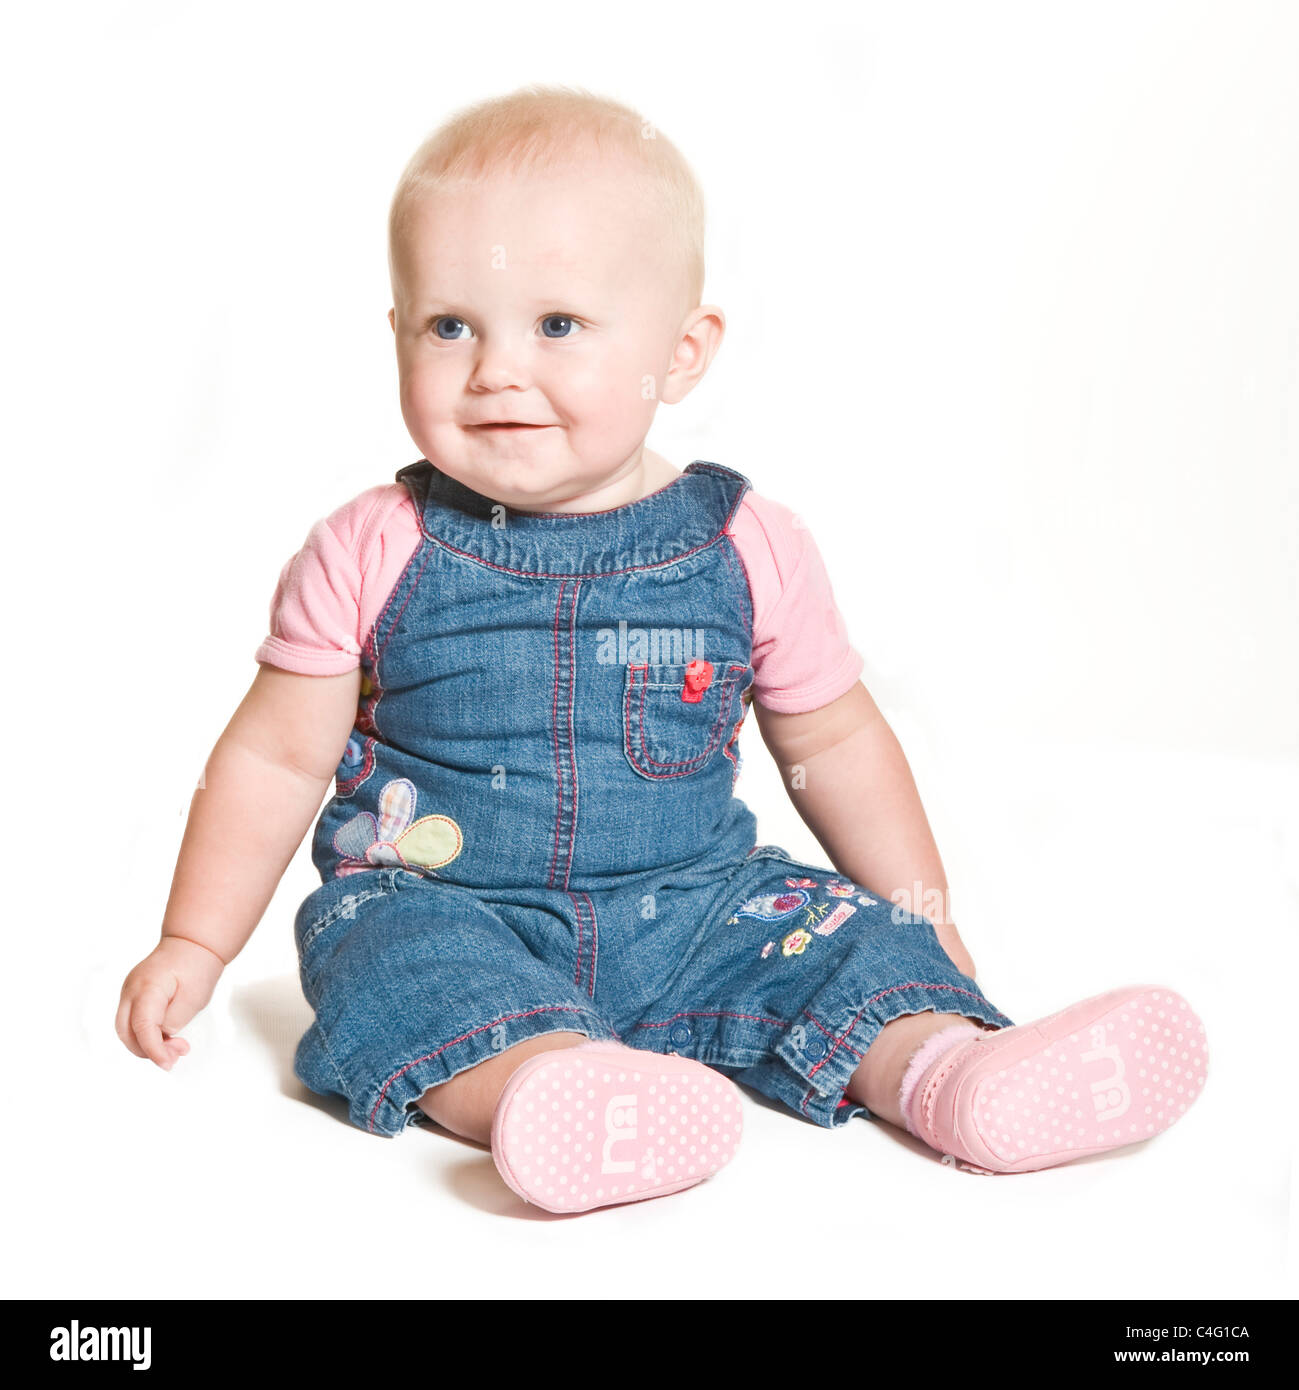 A cute 1 year old baby girl with blue eyes wearing denim and pink smiling against a pure white (255) background. Stock Photo